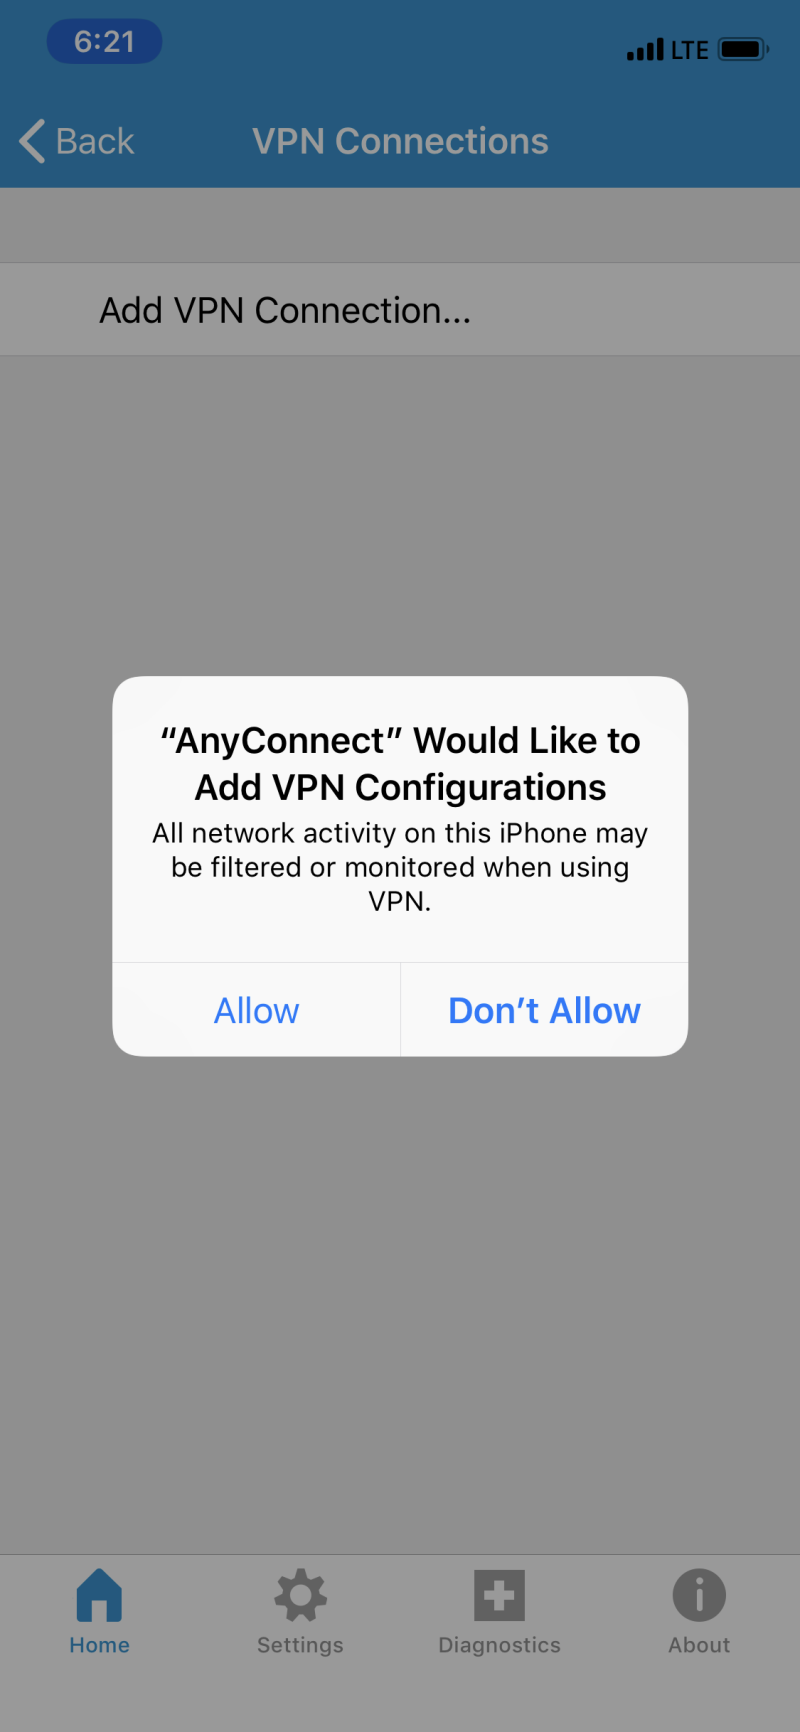 Allow adding of AnyConnect VPN configuration